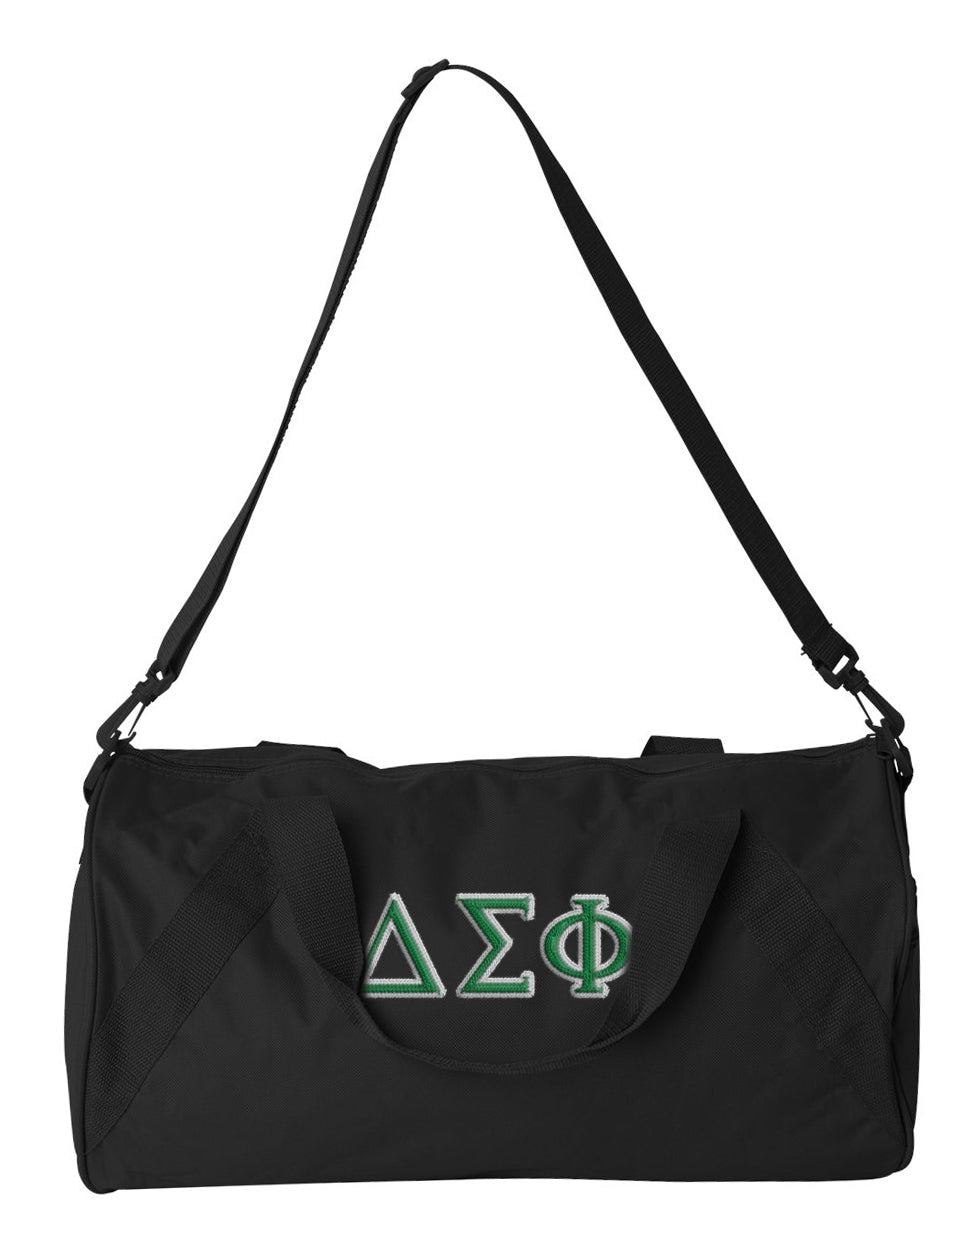 Delta Sigma Phi Embroidered Duffel Bag